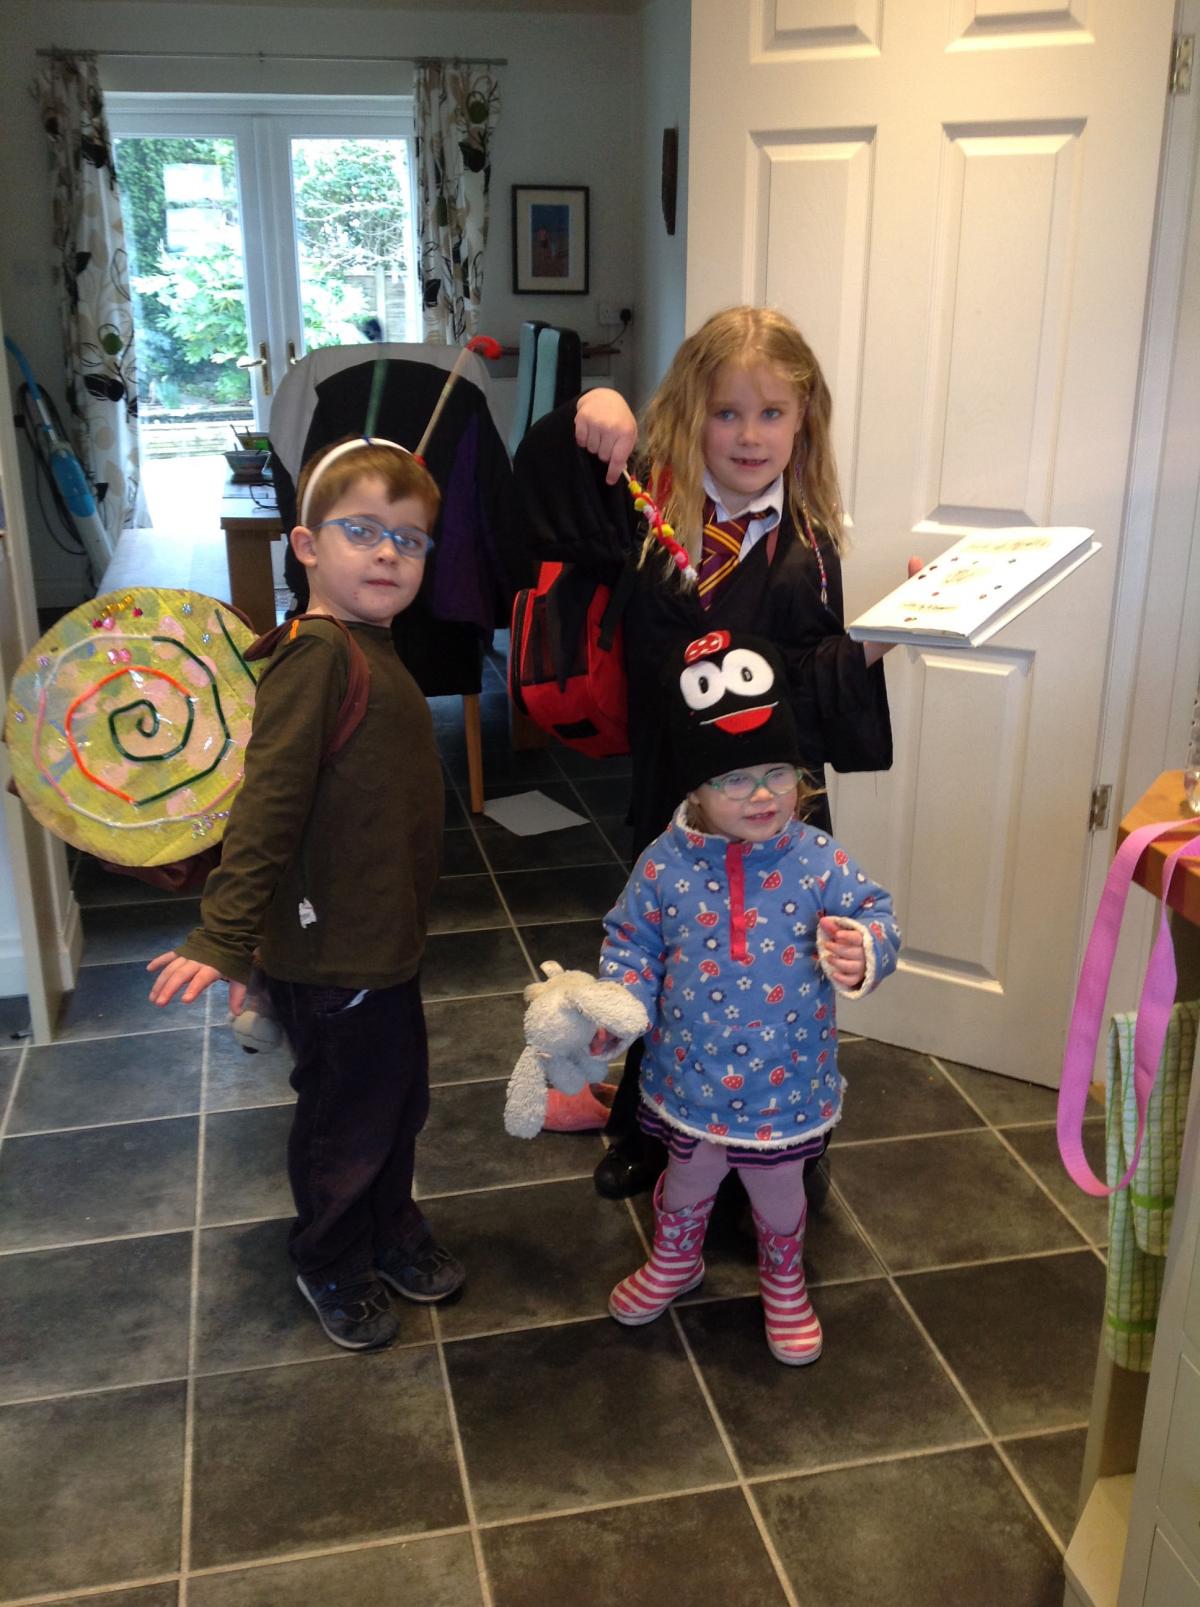 Alfie and Matilda Warren off to Goostrey Primary school- with little sister Poppy photobombing as Hermione and snail (from Snail and the Whale)